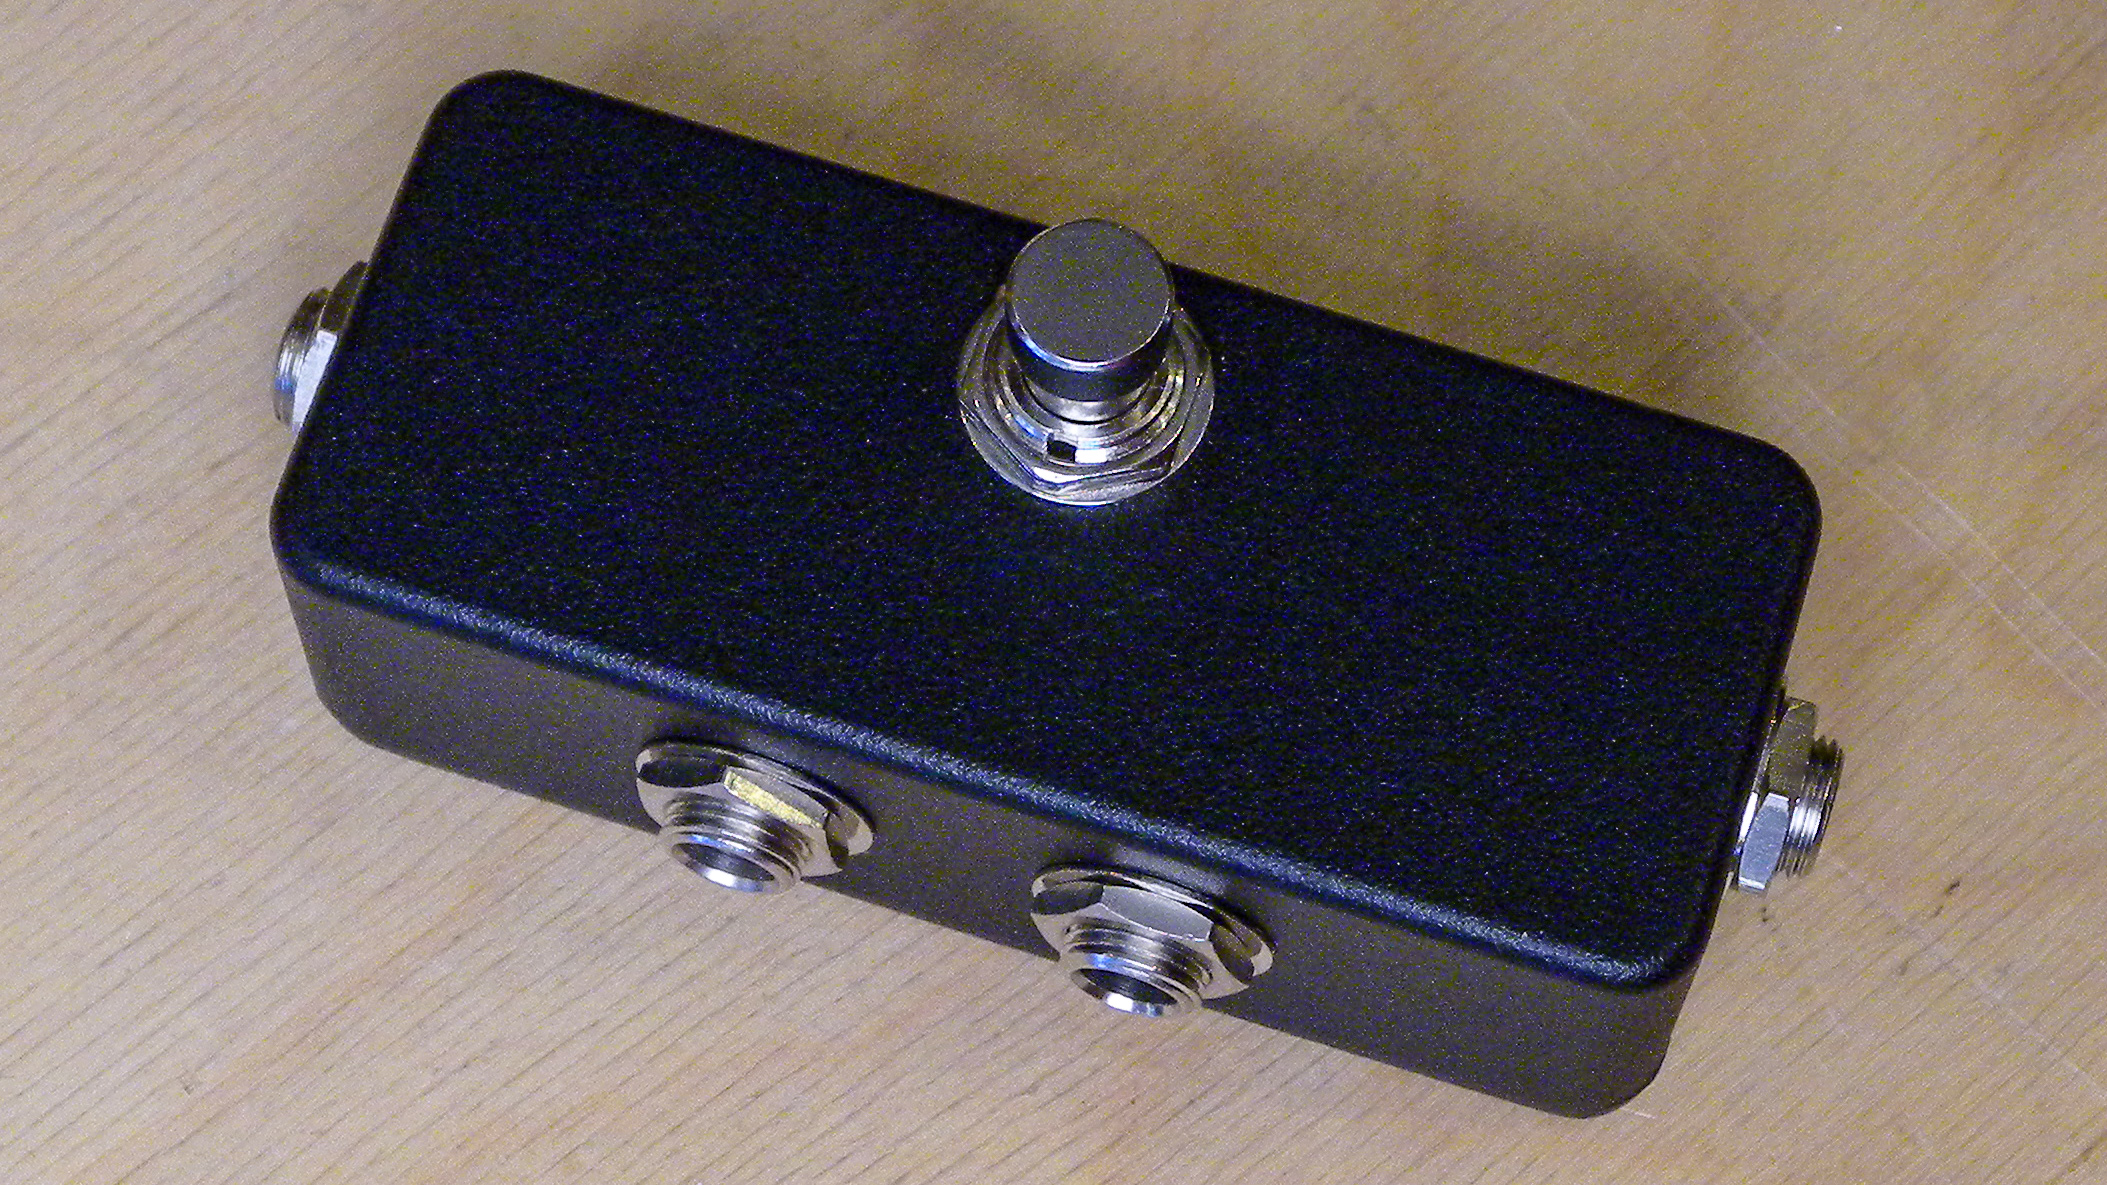 Build this bypass pedal to turn your stompboxes OFF! - StewMac